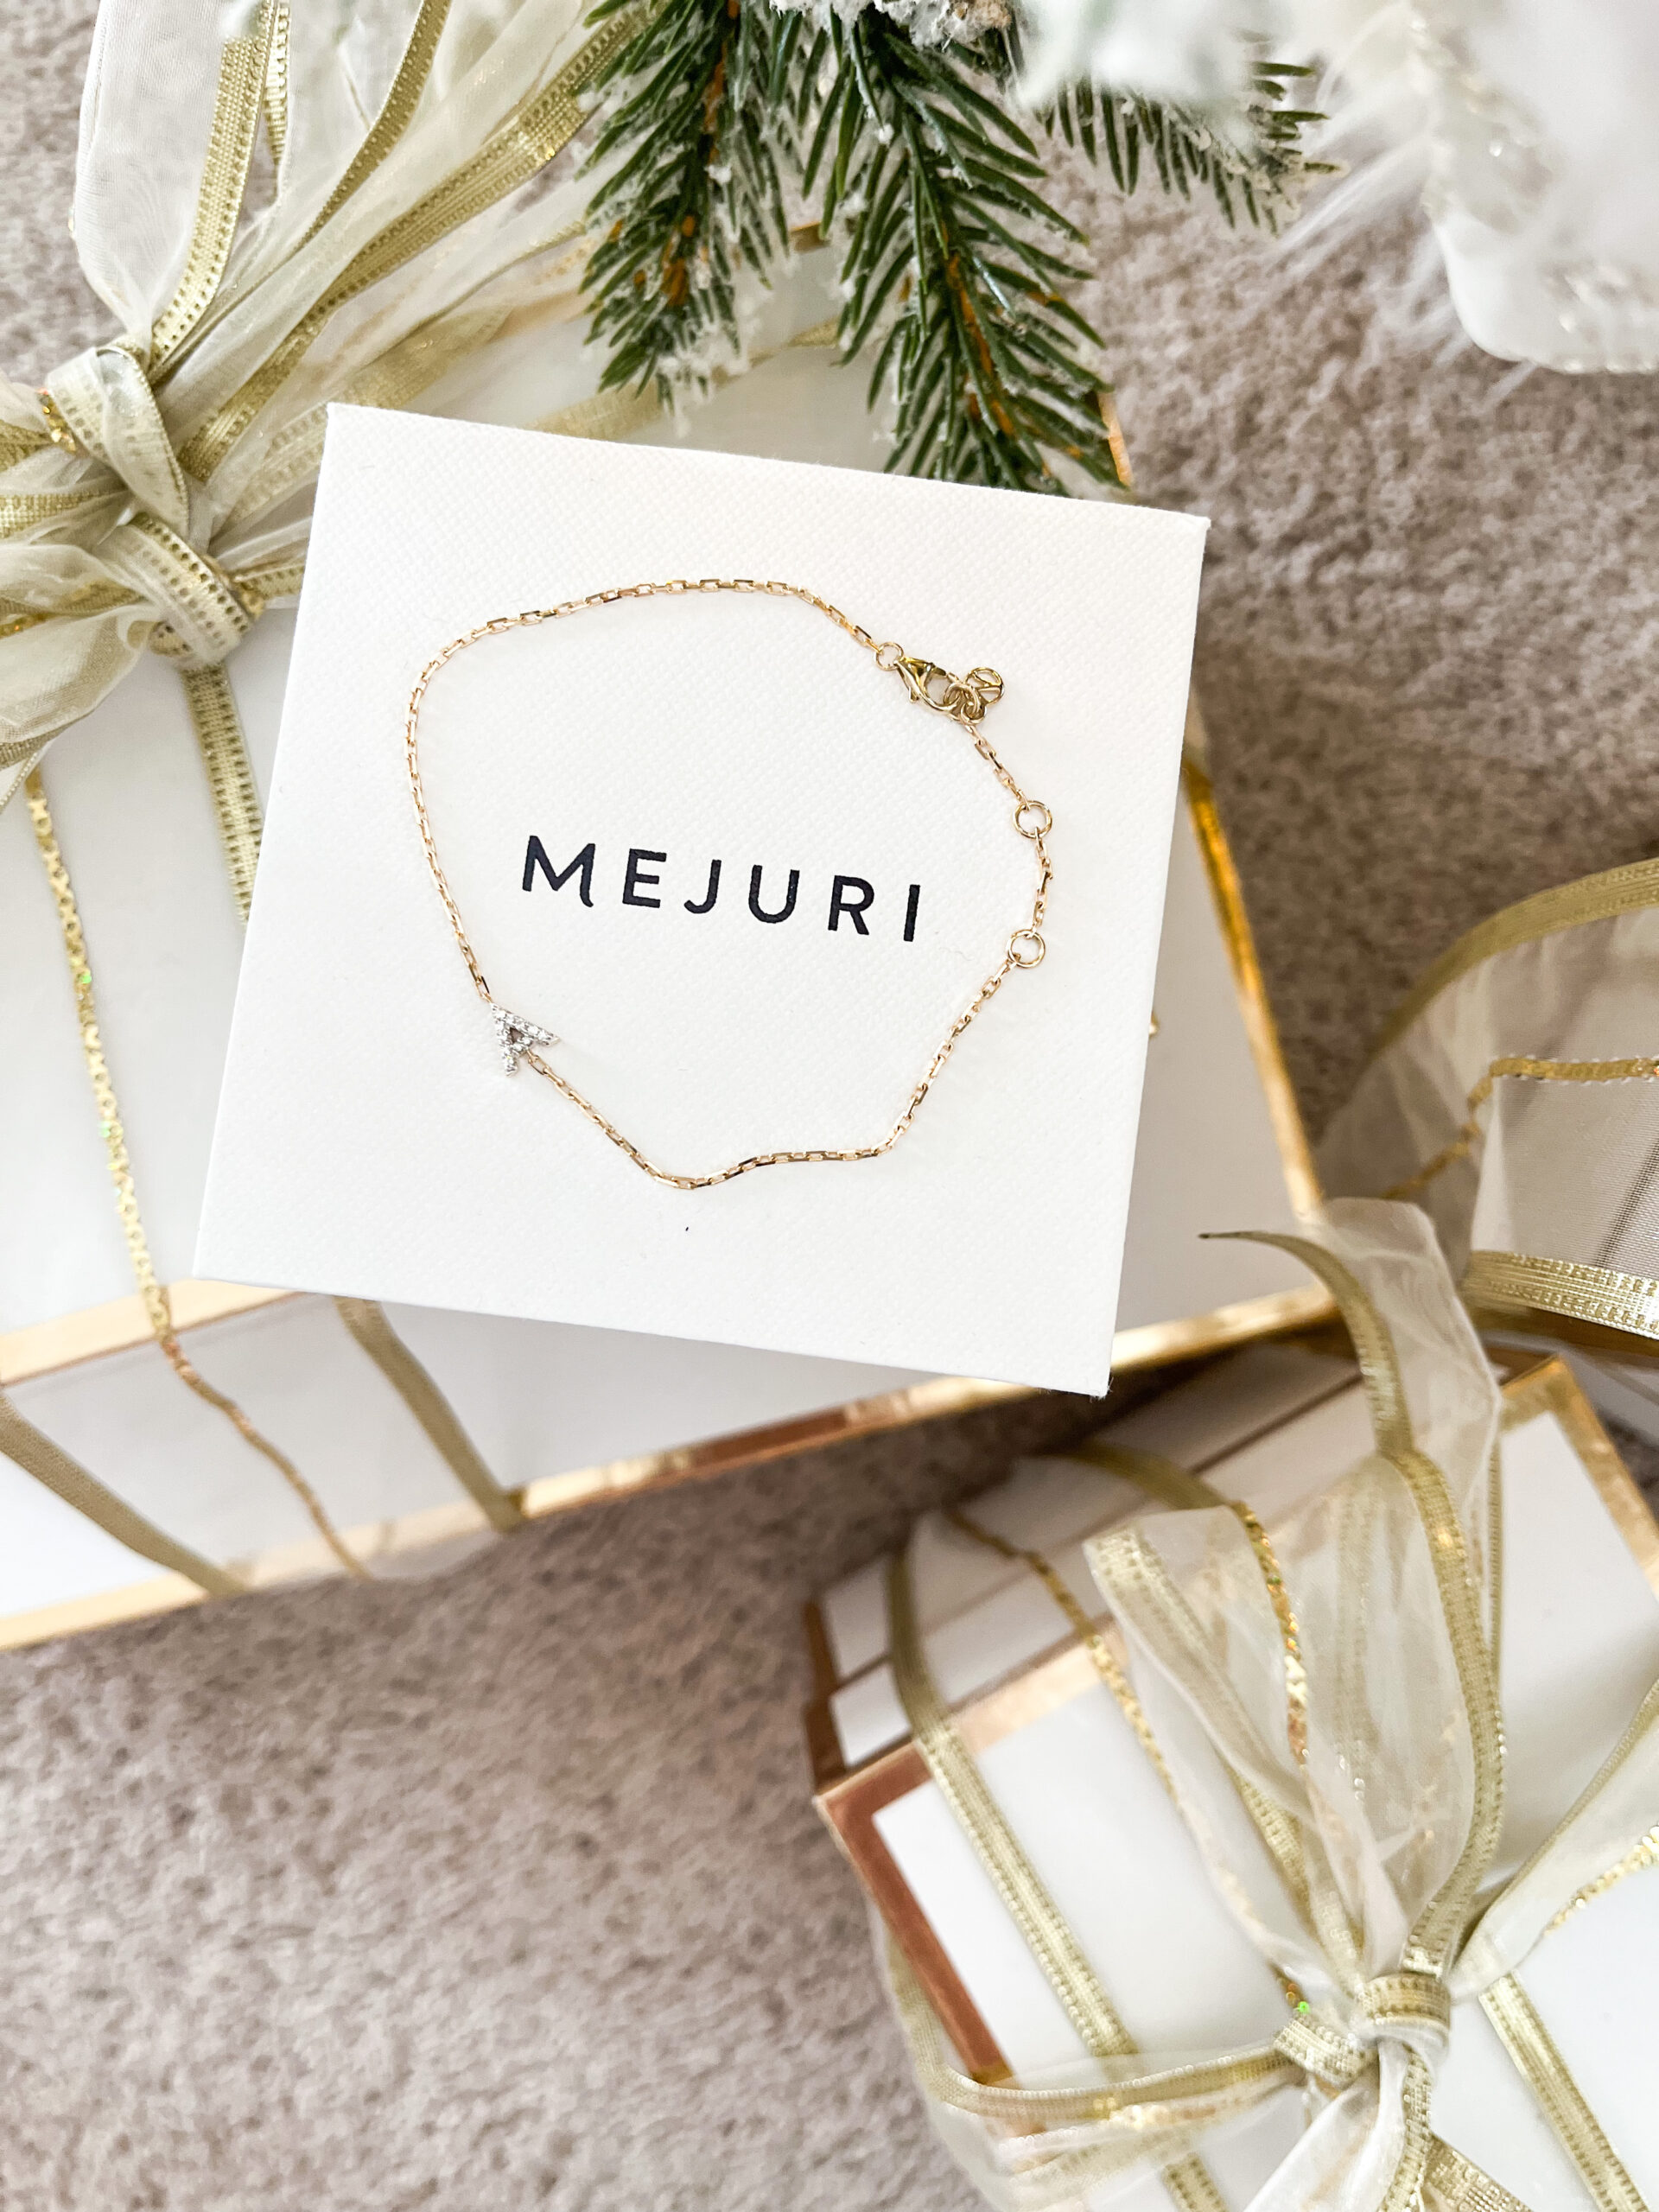 Gift Guide for Her on Livin' Life with Style Mejuri